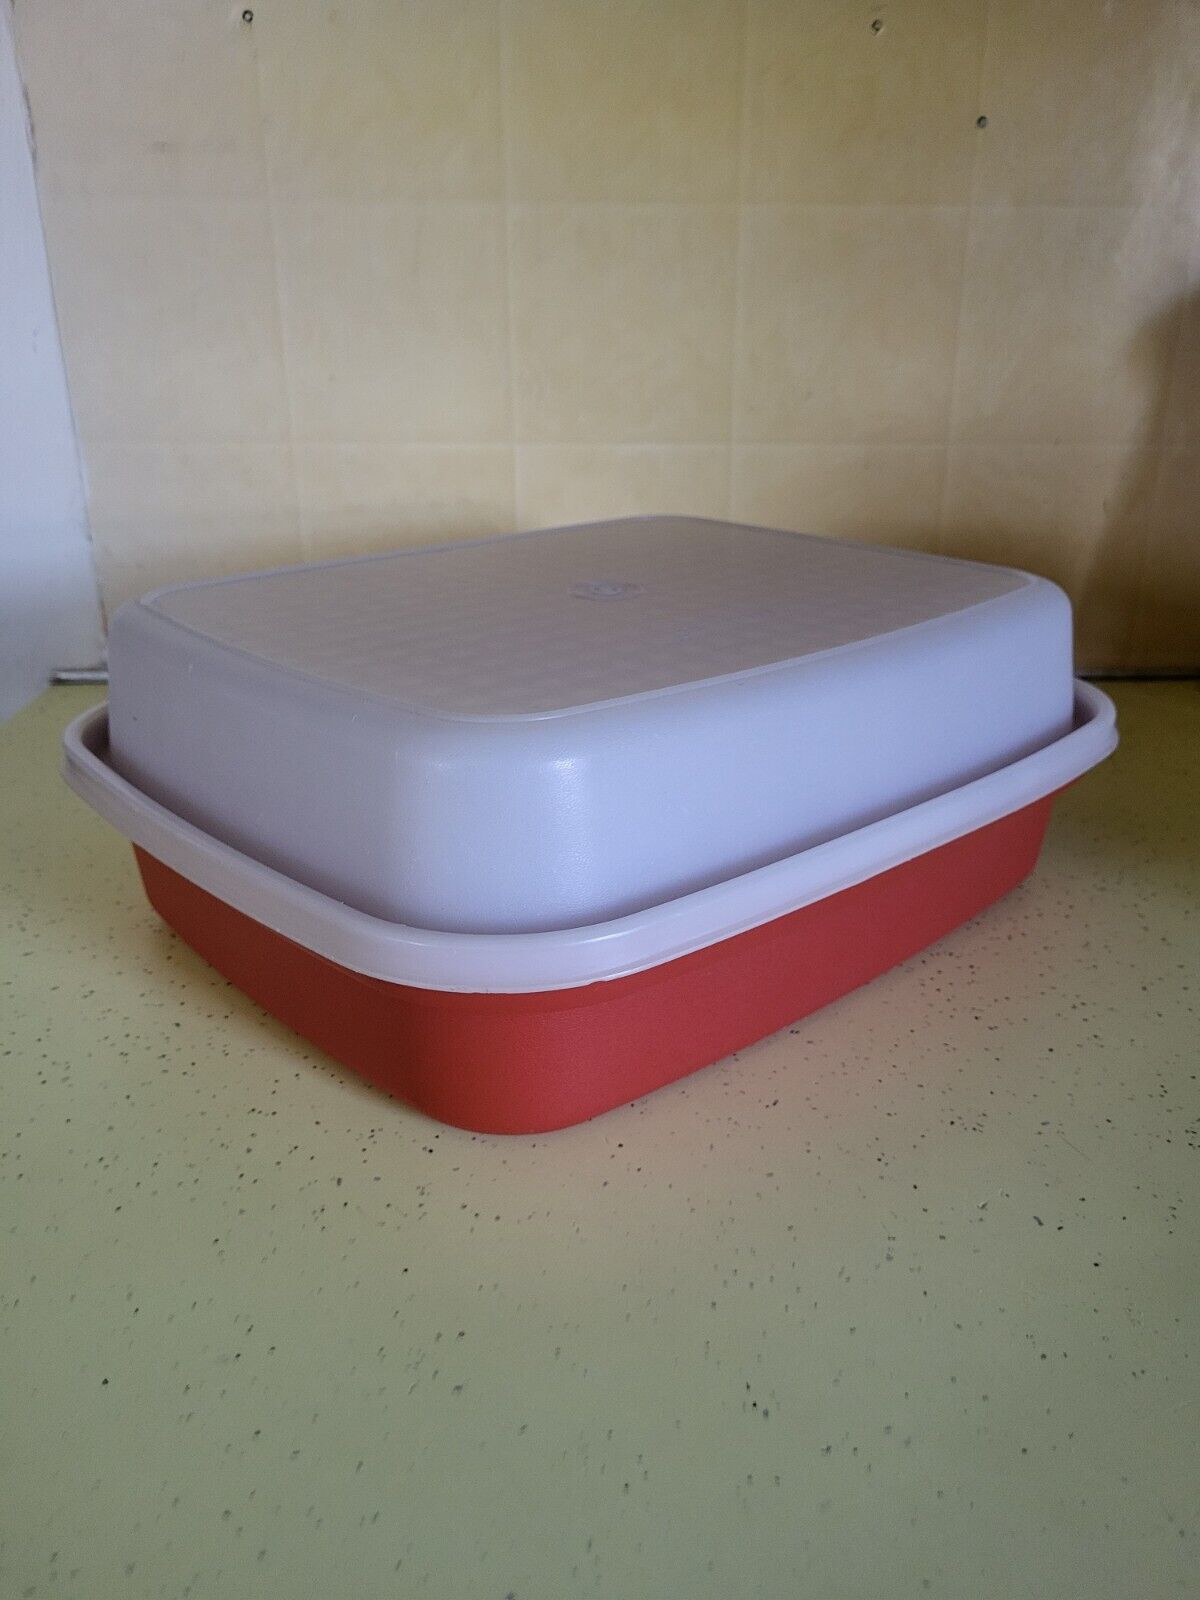 Vintage Tupperware Large Red Season Serve Marinade Container 1294-8